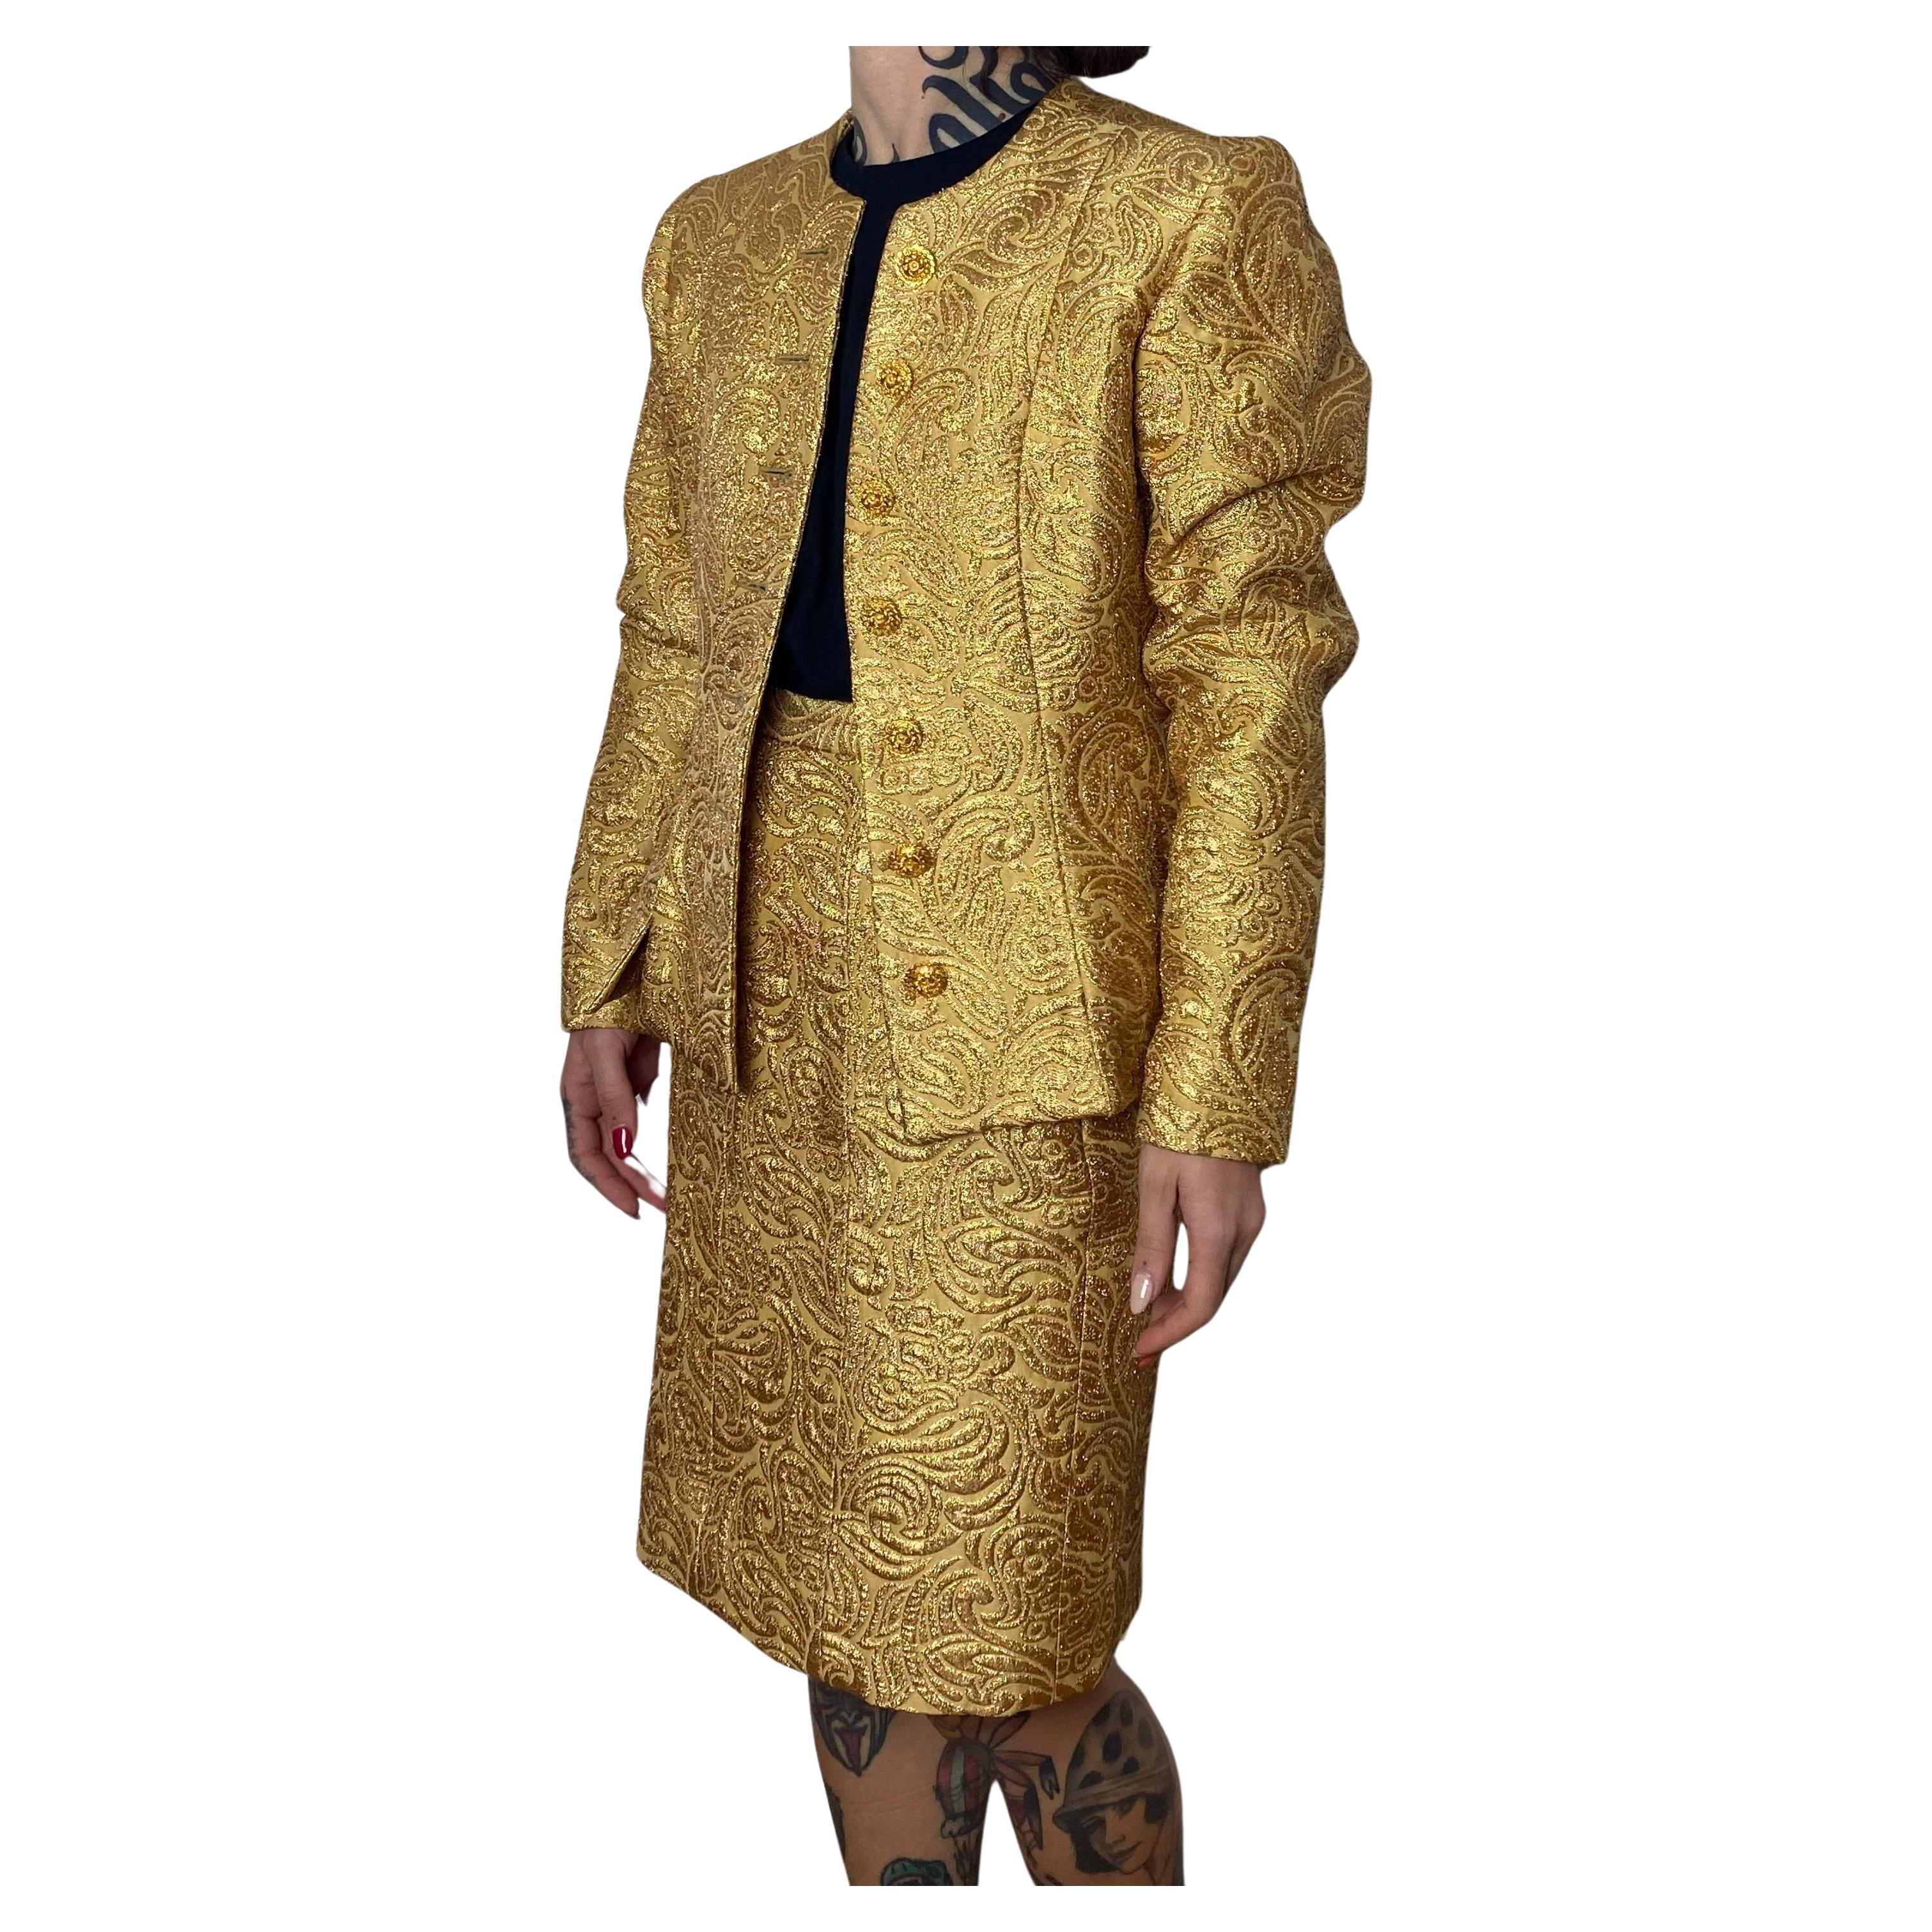 YSL gold brocade suit For Sale